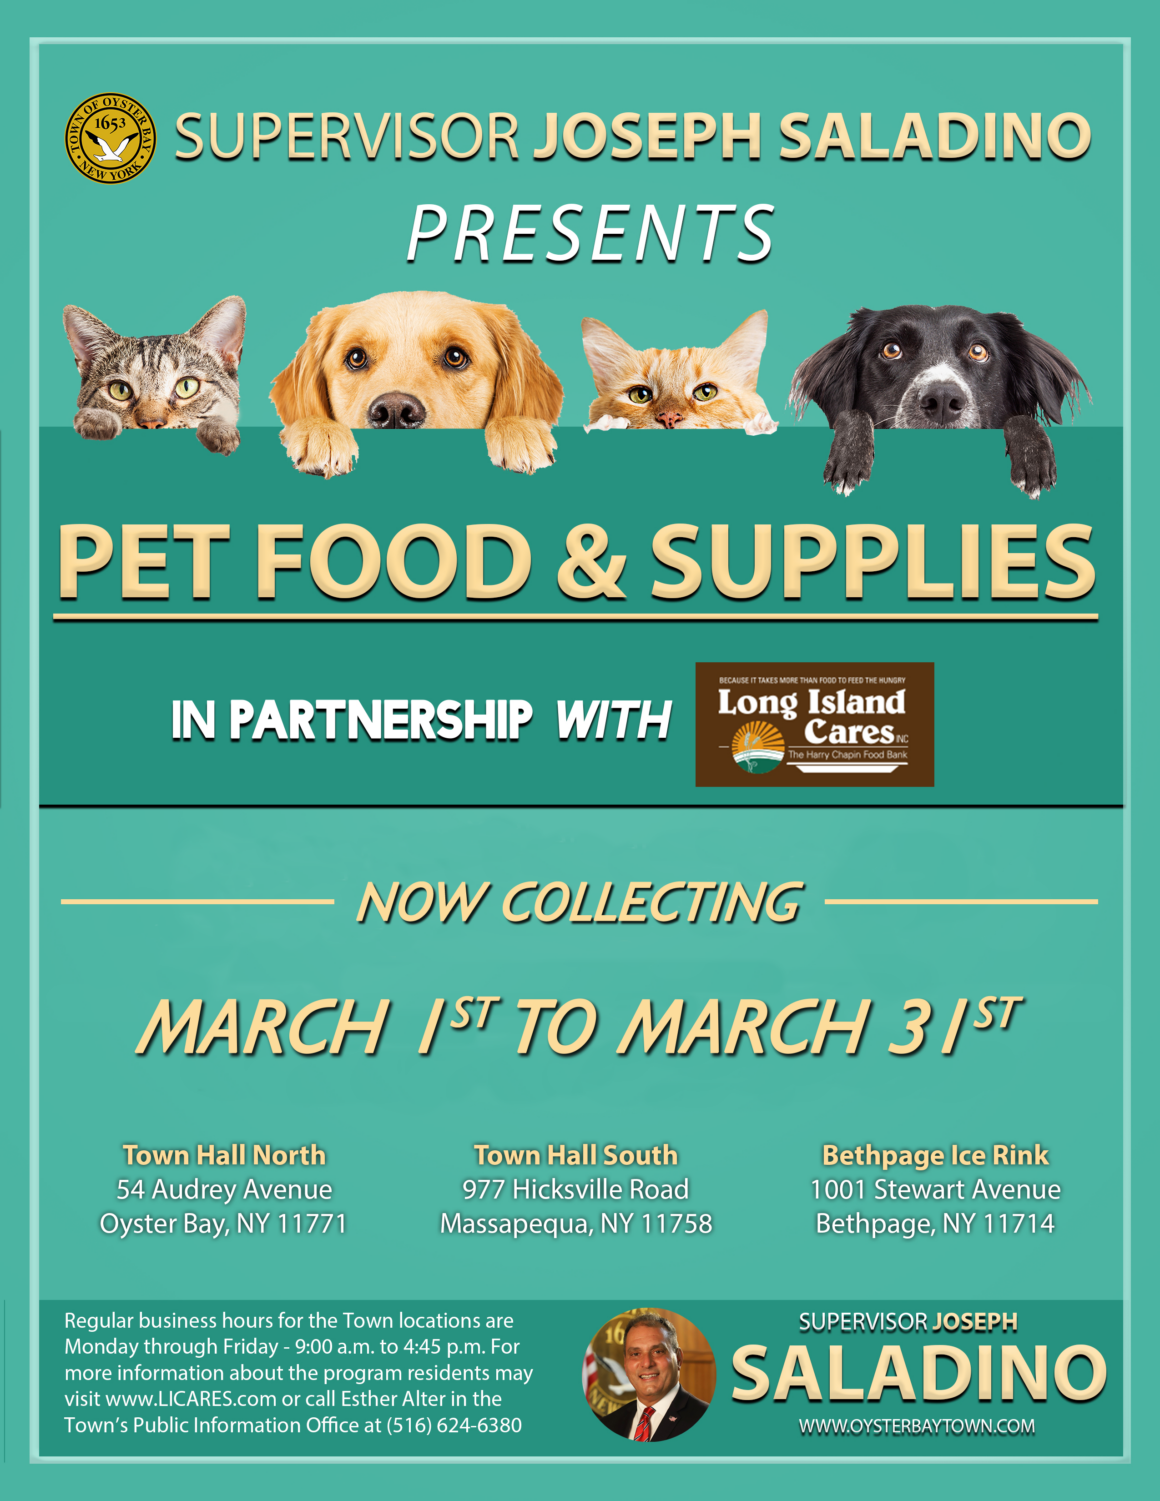 Town Launching Pet Food & Supply Drive with LI Cares